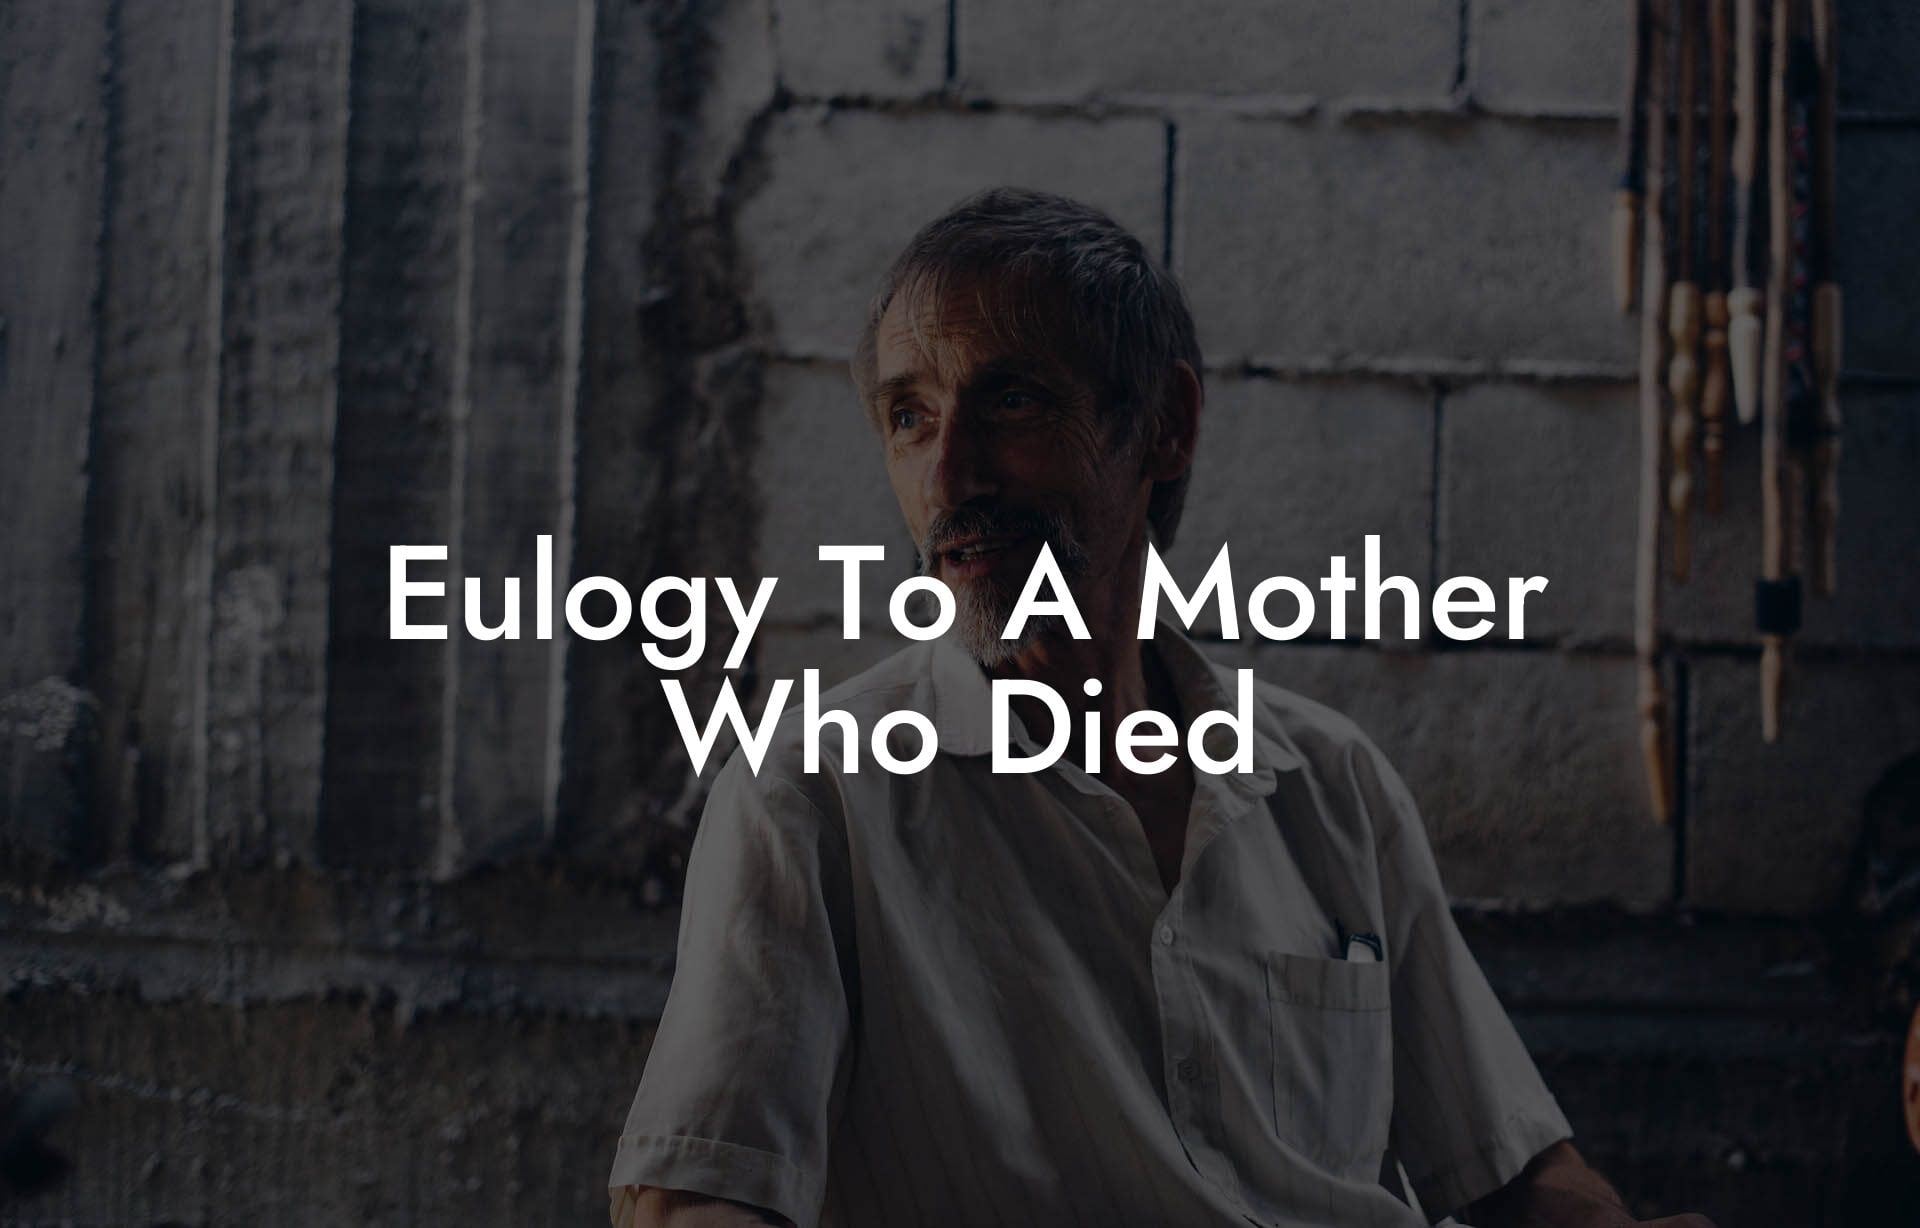 Eulogy To A Mother Who Died